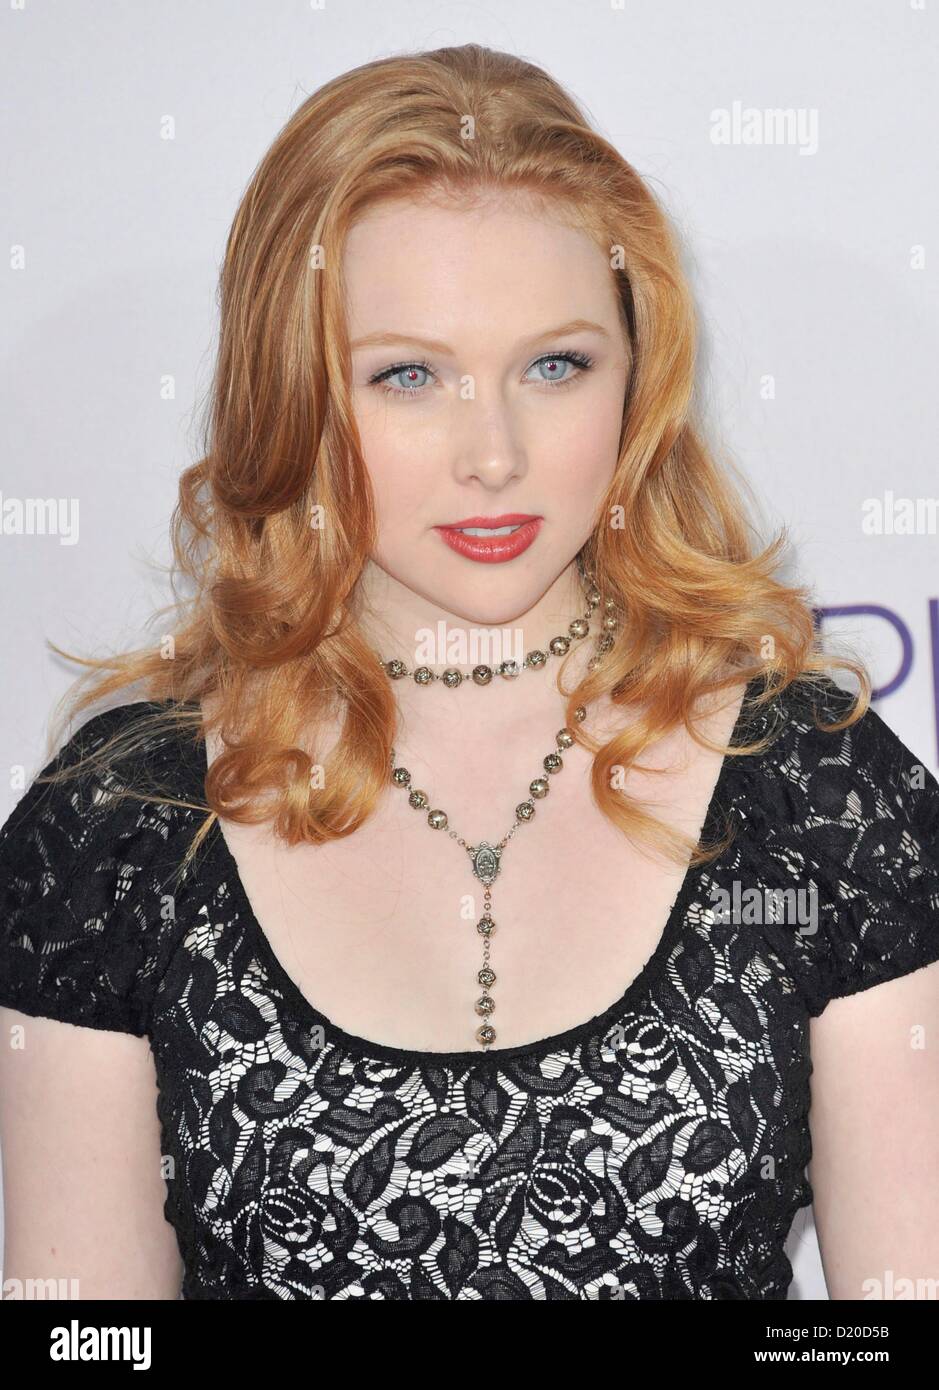 Molly C. Quinn at arrivals for The 39th Annual People's Choice Awards - ARRIVALS, Nokia Theatre at L.A. LIVE, Los Angeles, CA January 9, 2013. Photo By: Elizabeth Goodenough/Everett Collection/Alamy live News Stock Photo